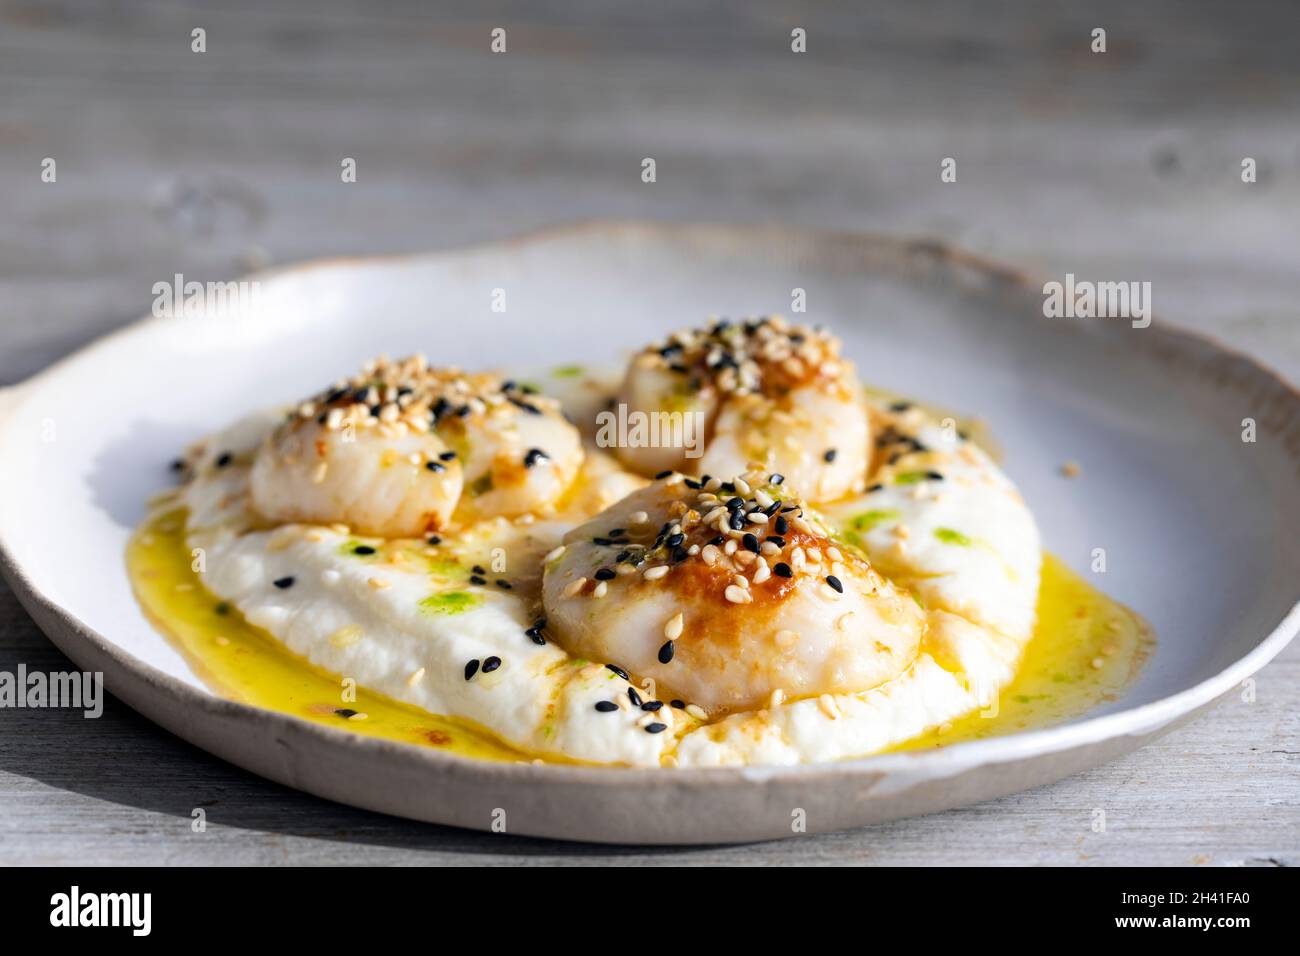 Grilled scallop with miso butter, sesame seeds and parsley oil on cauliflower puree Stock Photo